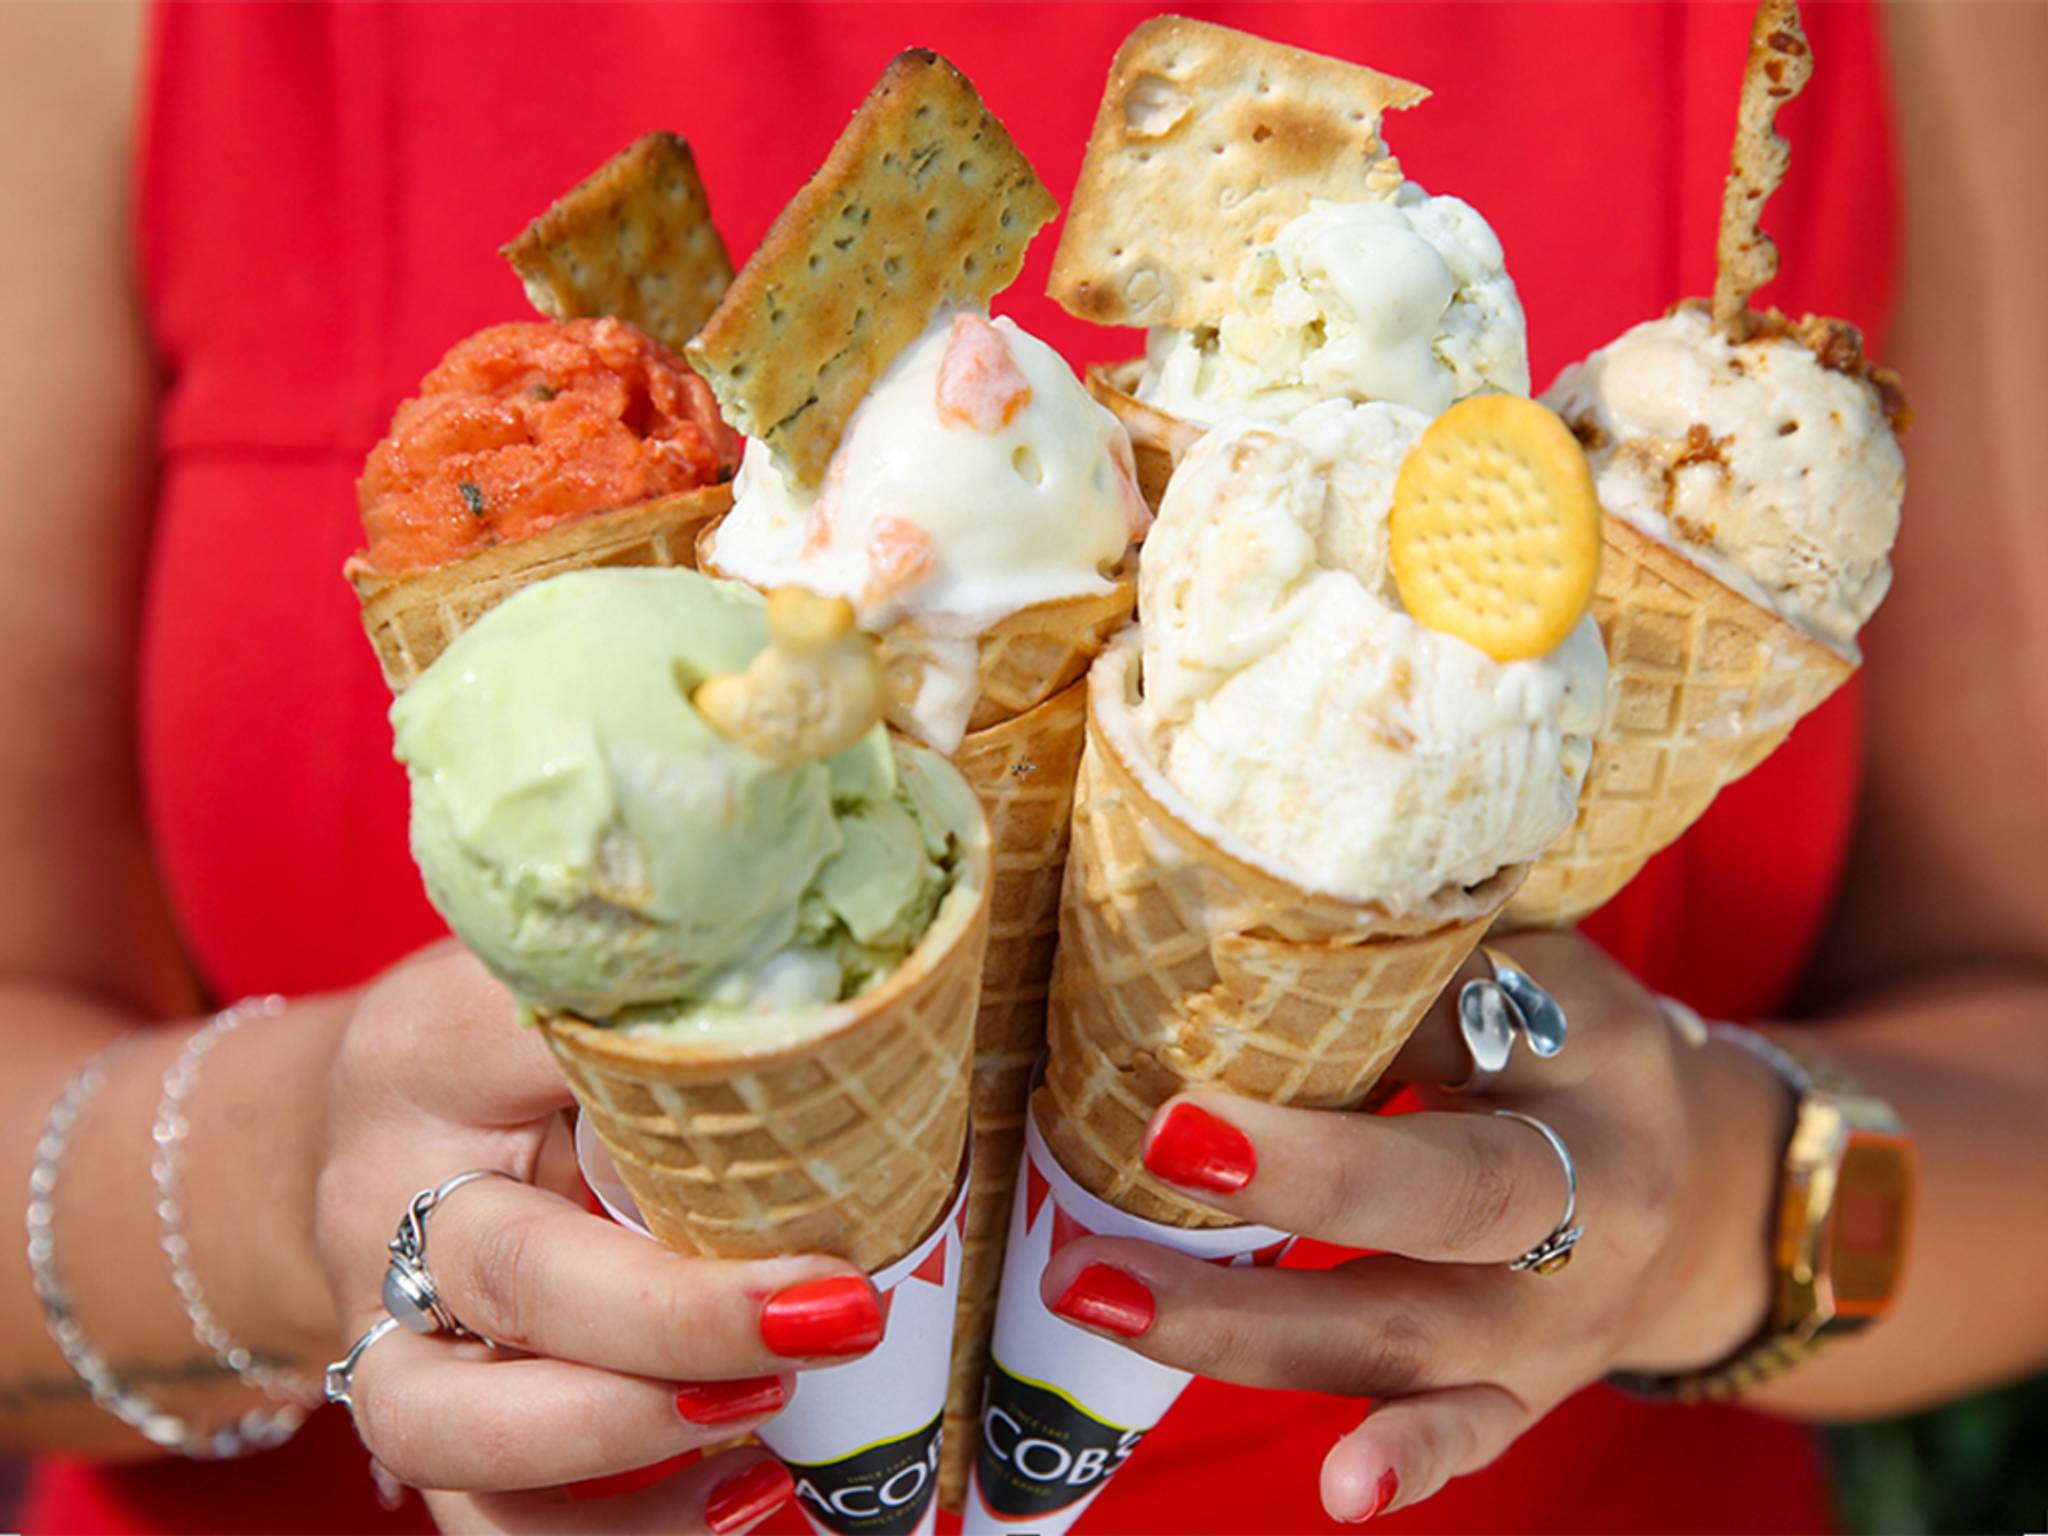 Ice cream fans get a taste for savoury flavours